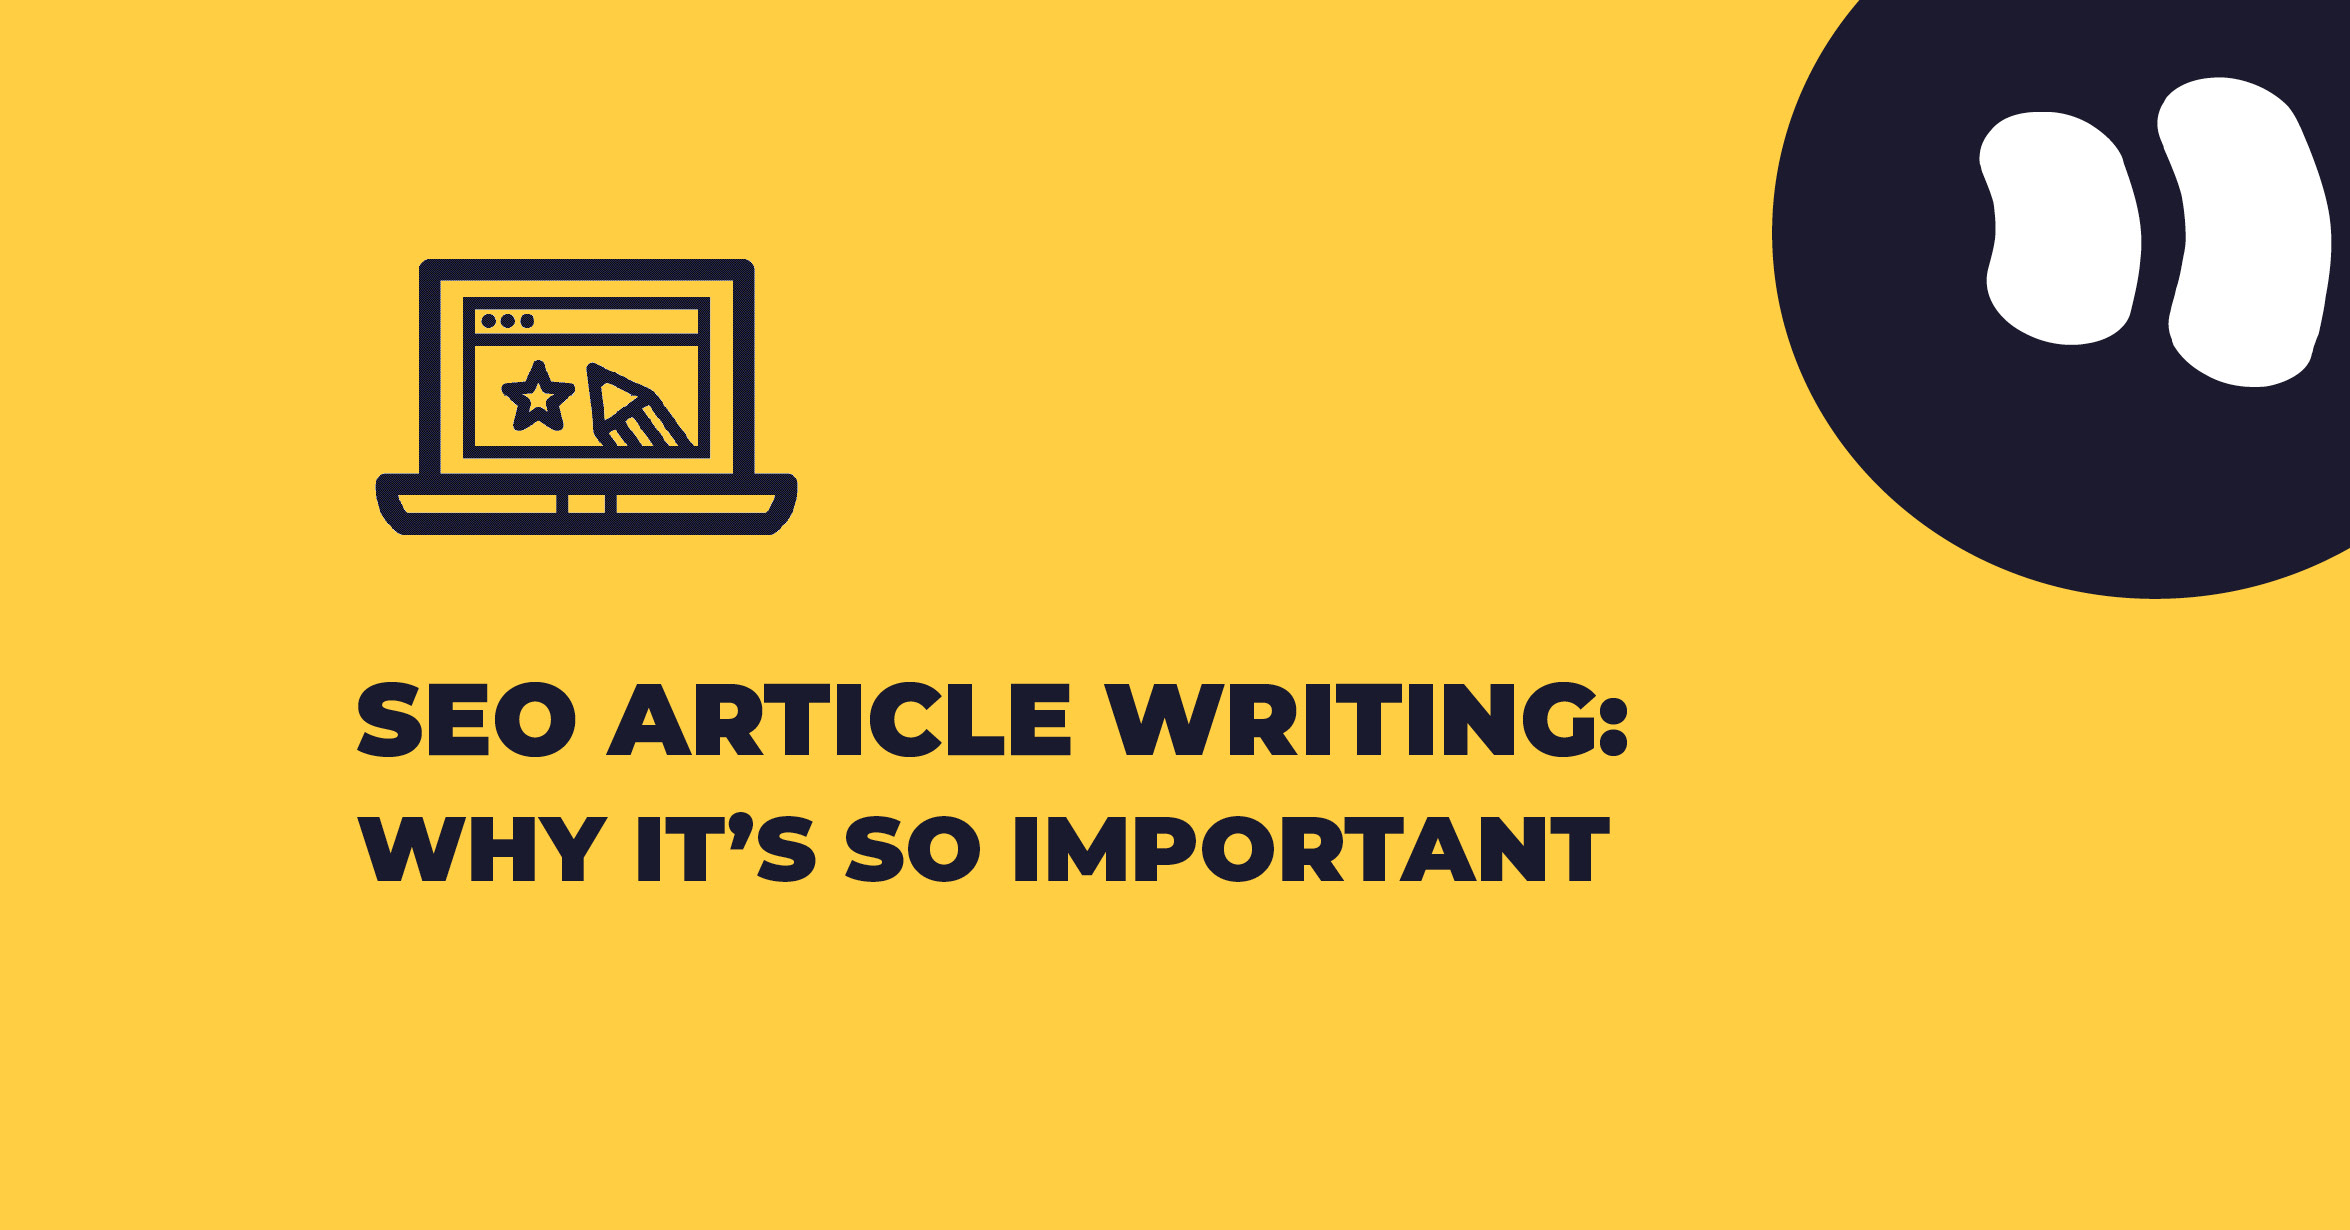 SEO Article Writing: Why It’s So Important